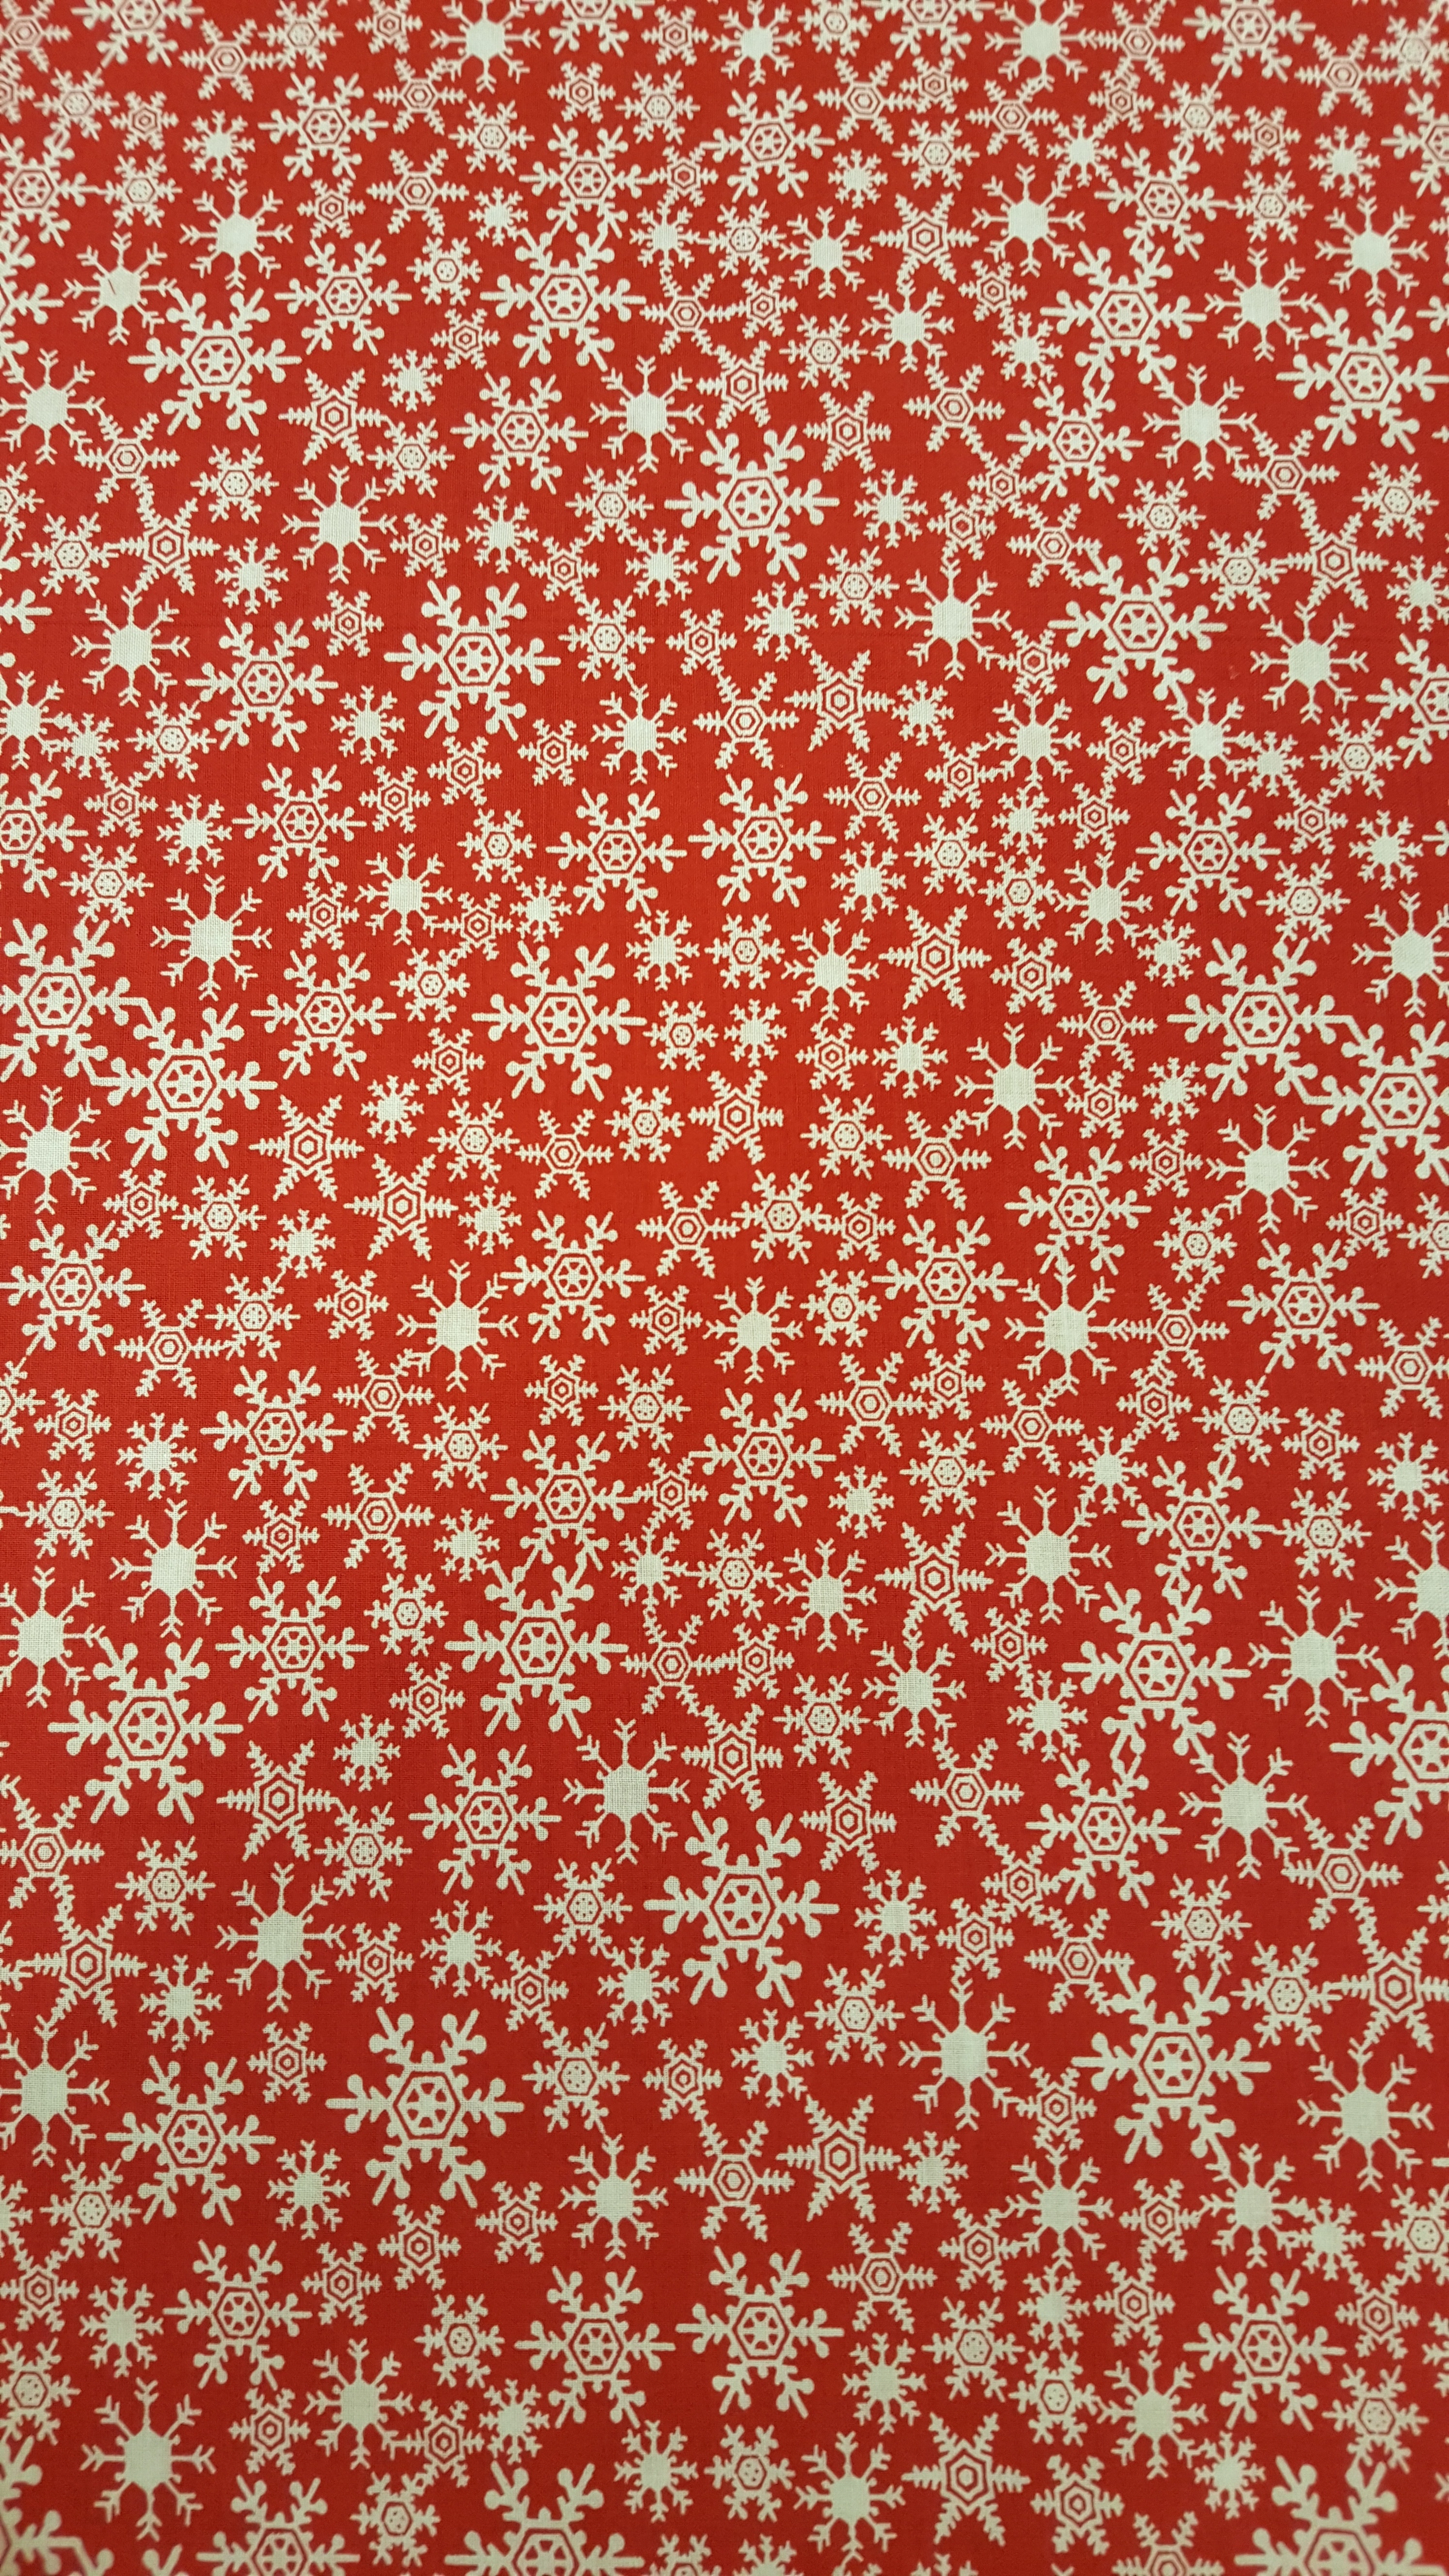 Red, Holiday, Snow, Snowflakes, backgrounds, red